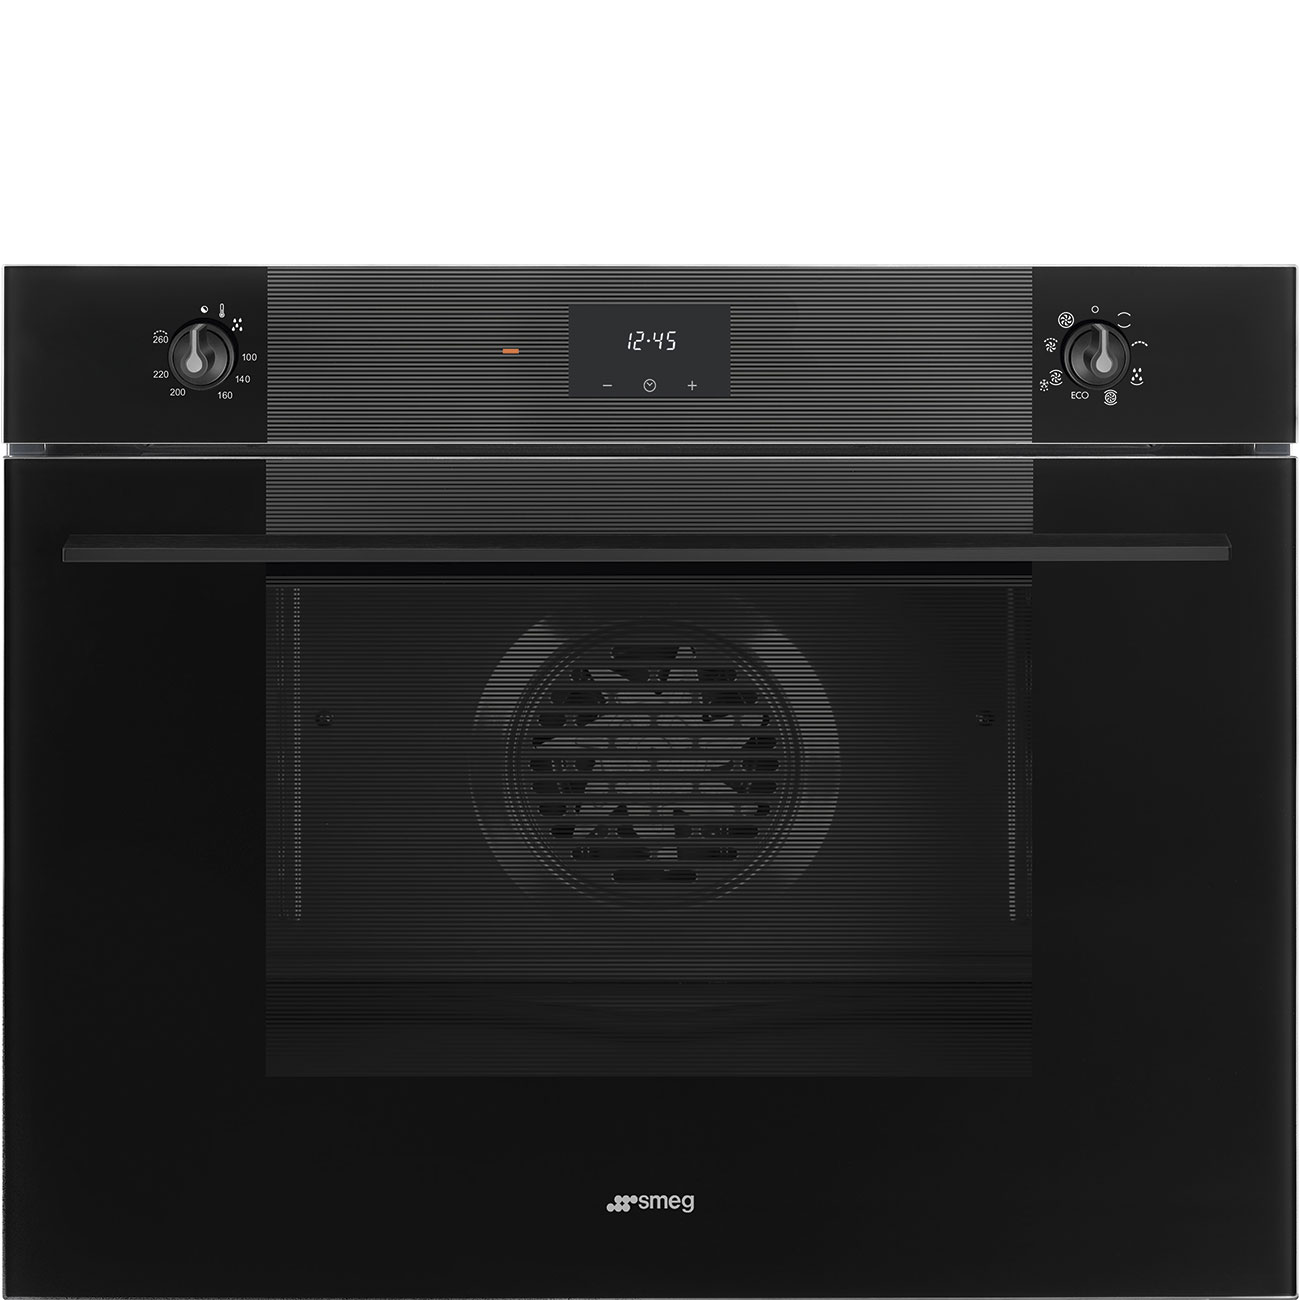 Thermo-ventilated Oven 75 cm Smeg_1